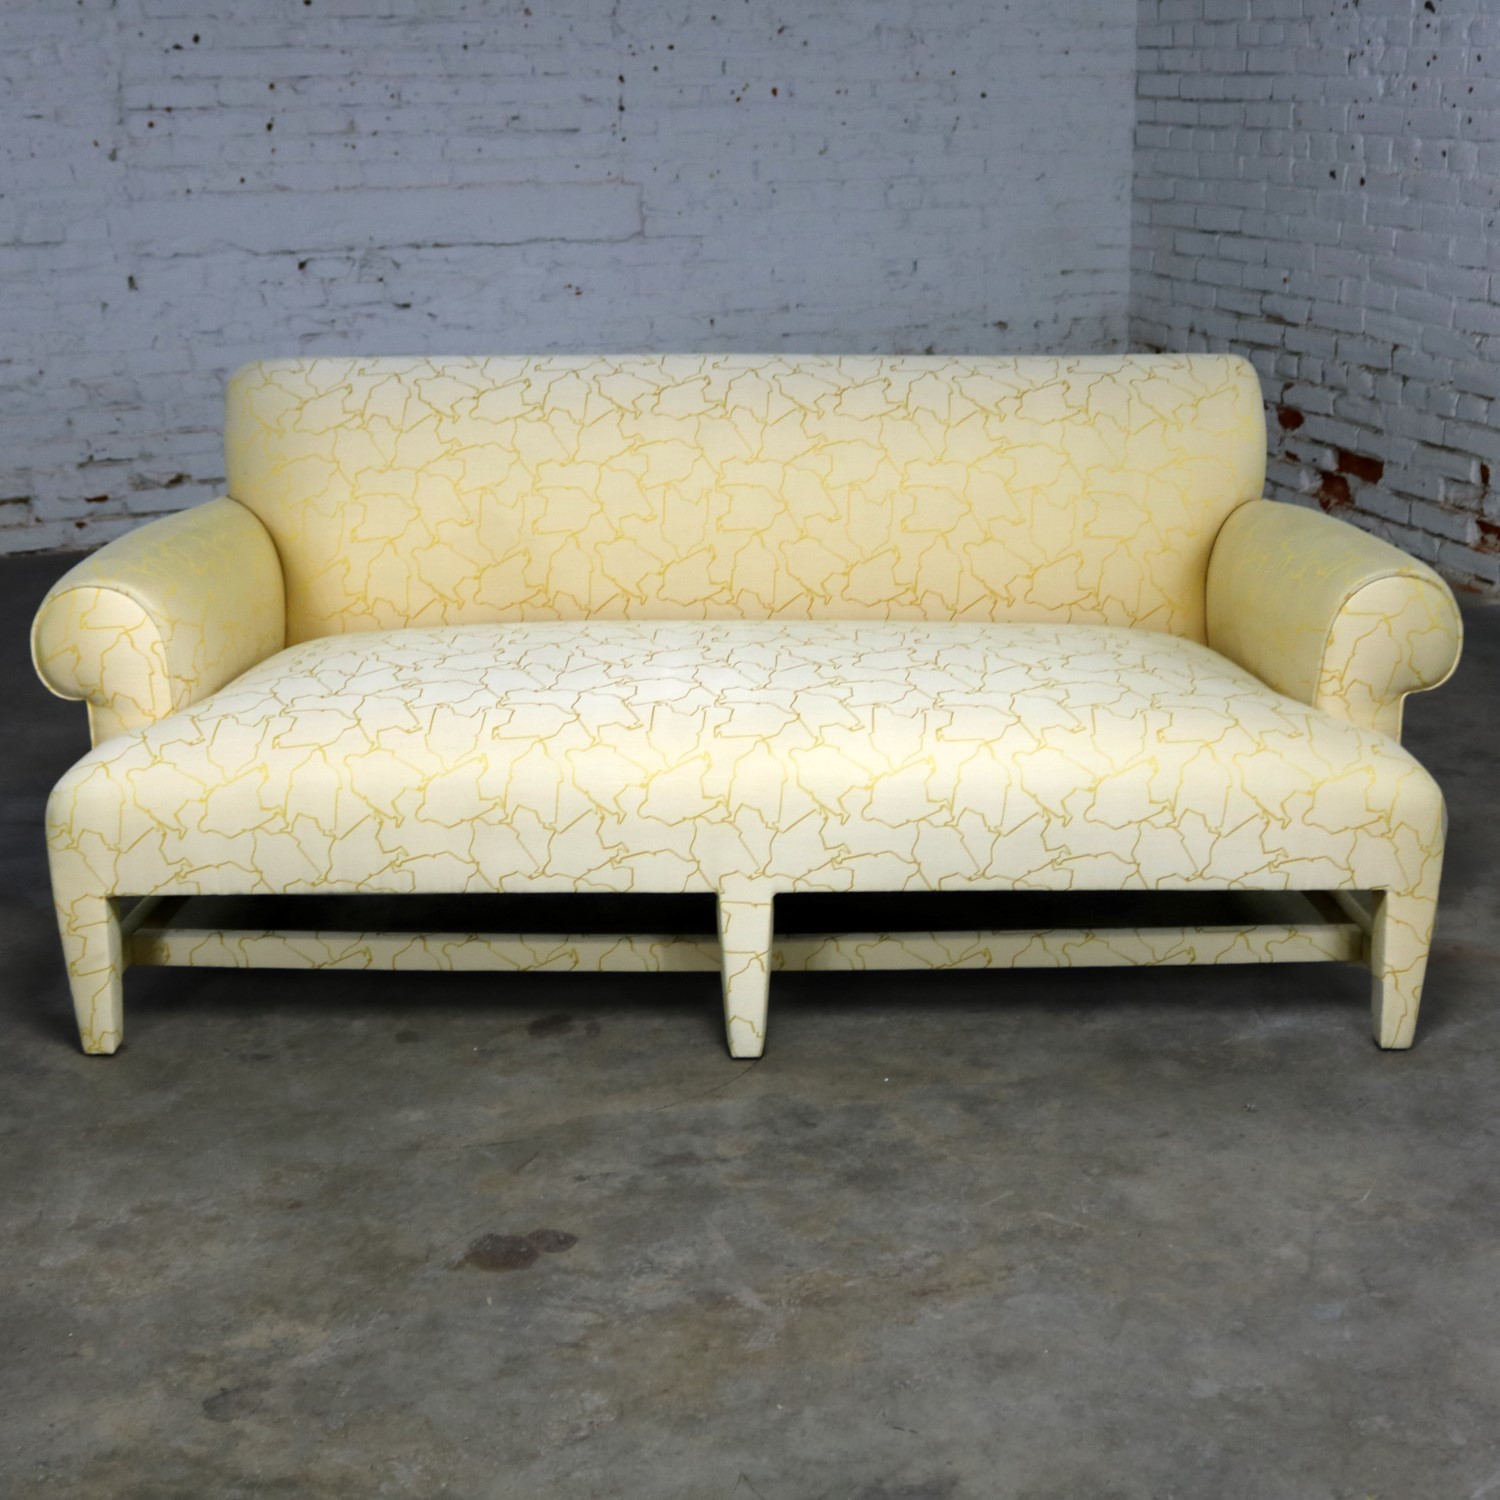 Donghia Love Seat Sofa in Cream and Yellow Fat Man Fabric Attributed to Angelo Donghia